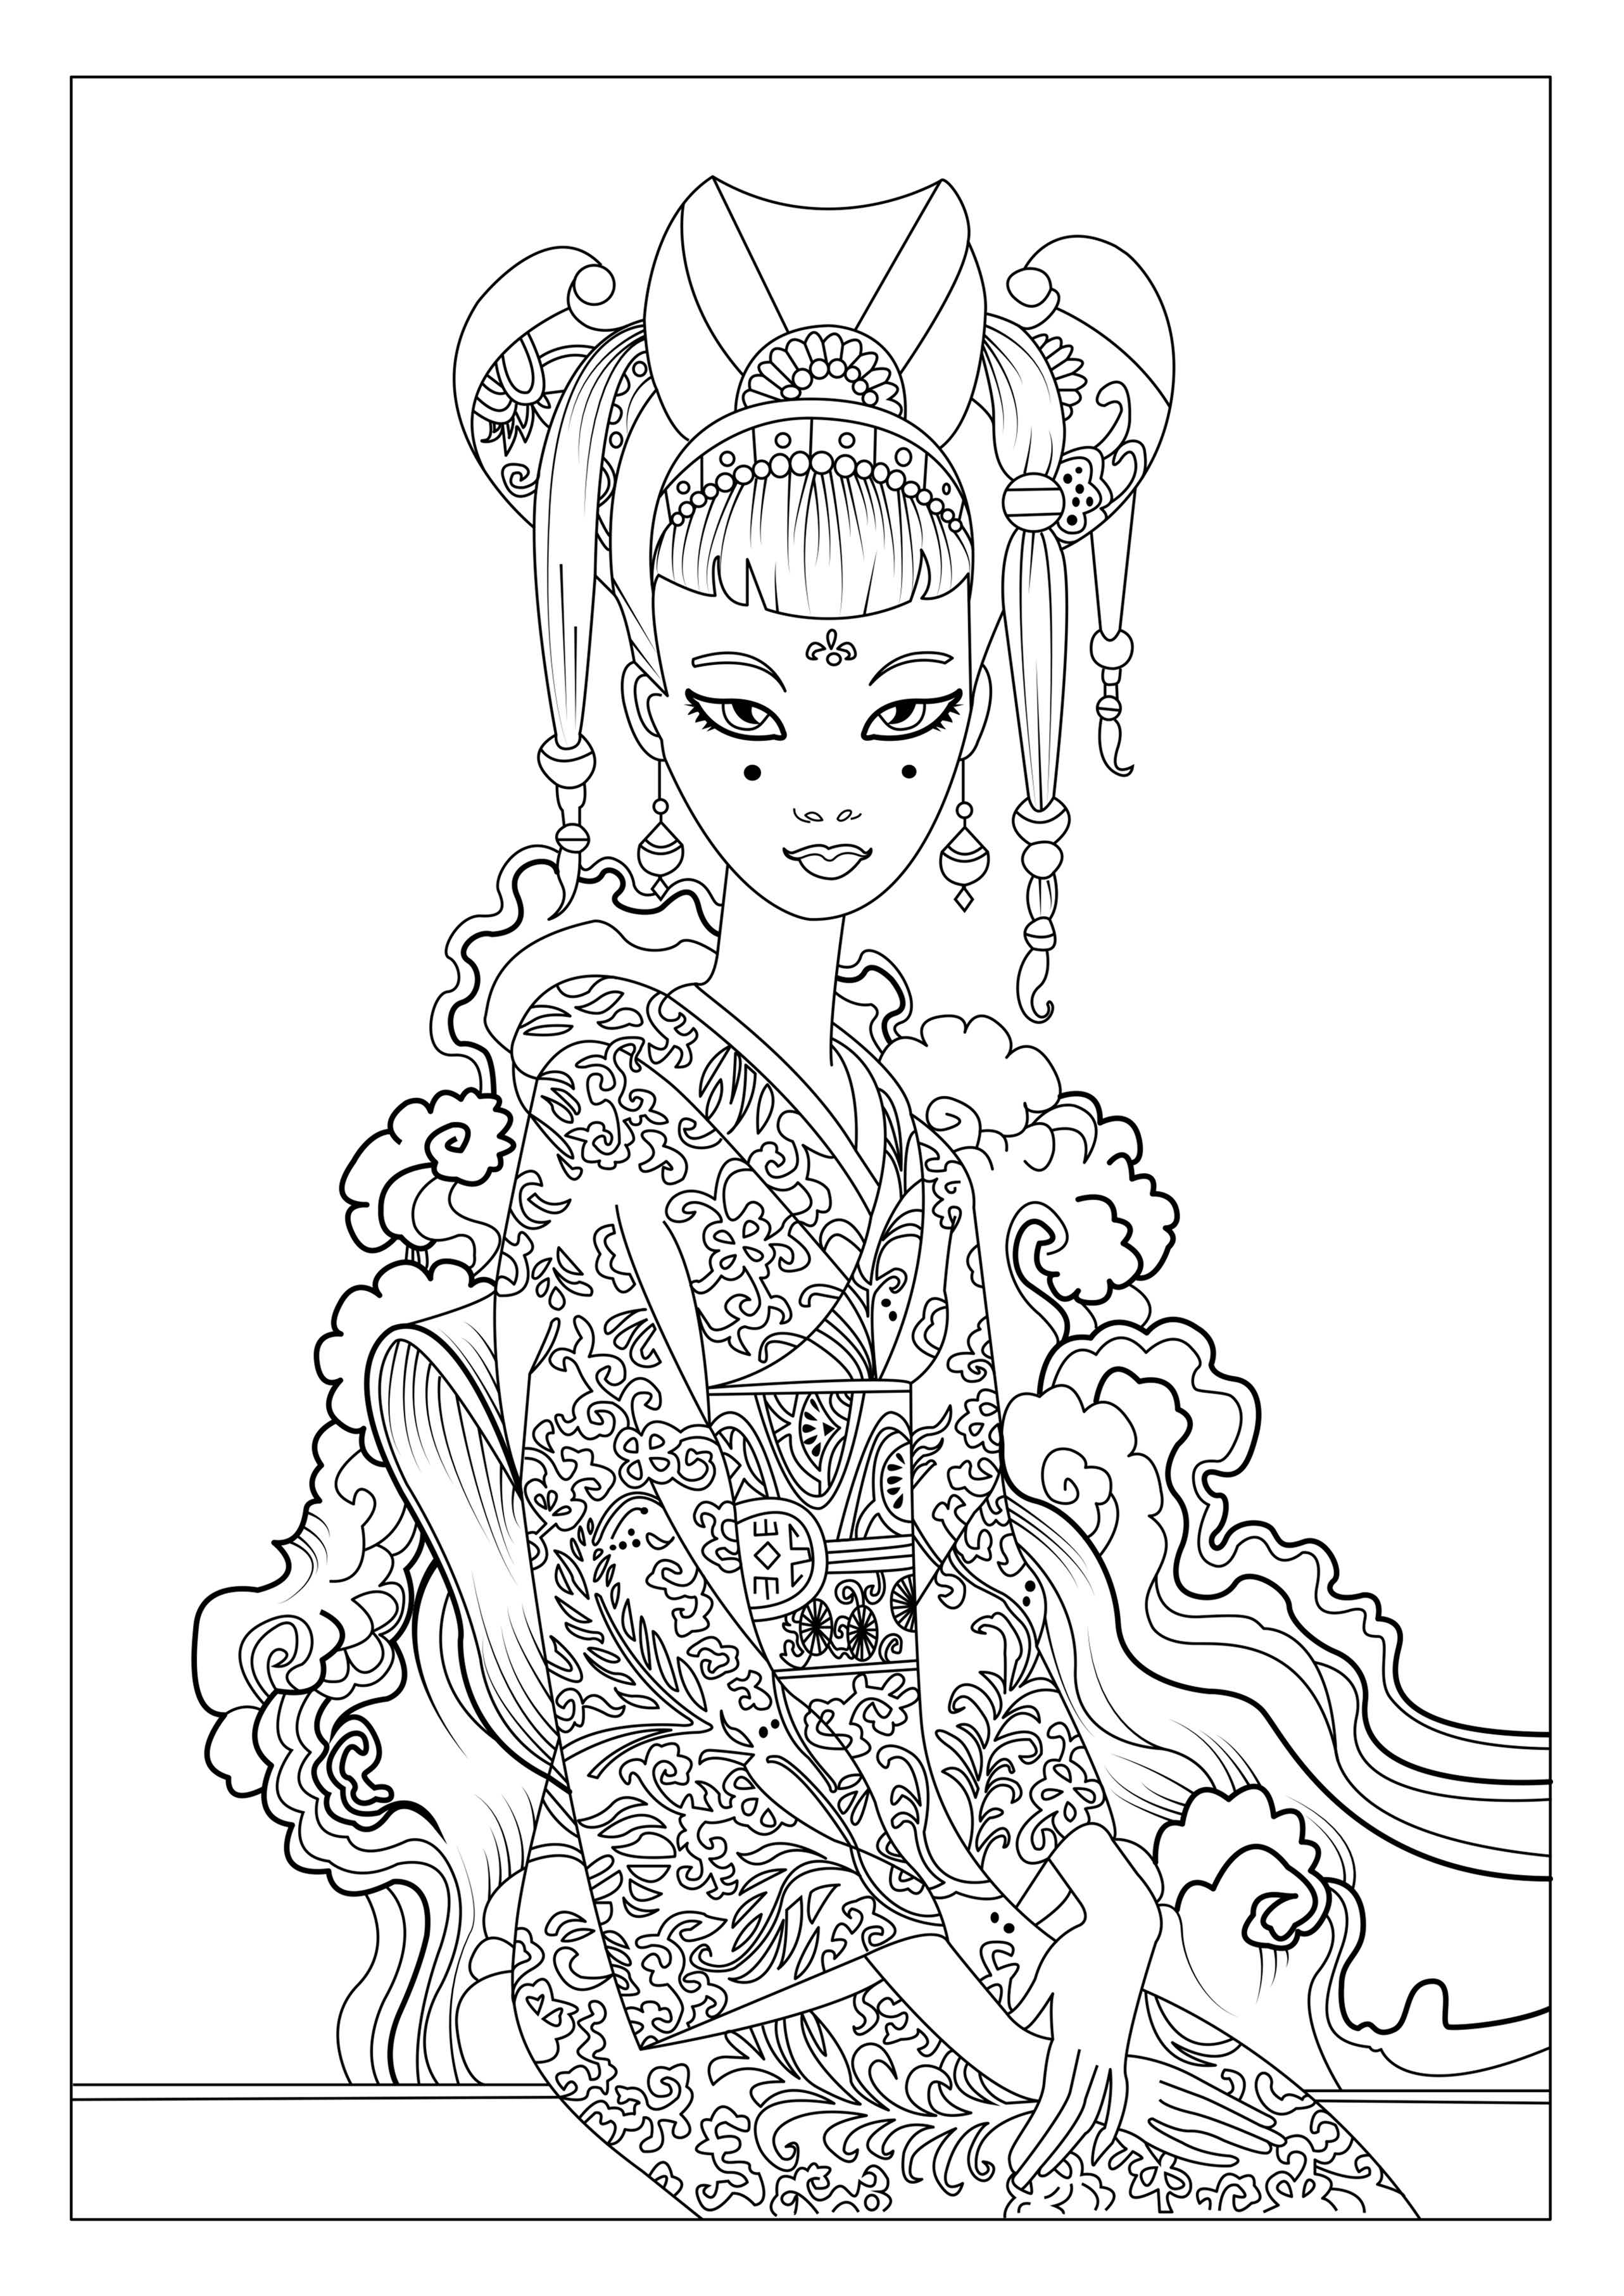 This is our coloring page with a japan woman by Céline, Artist : Celine